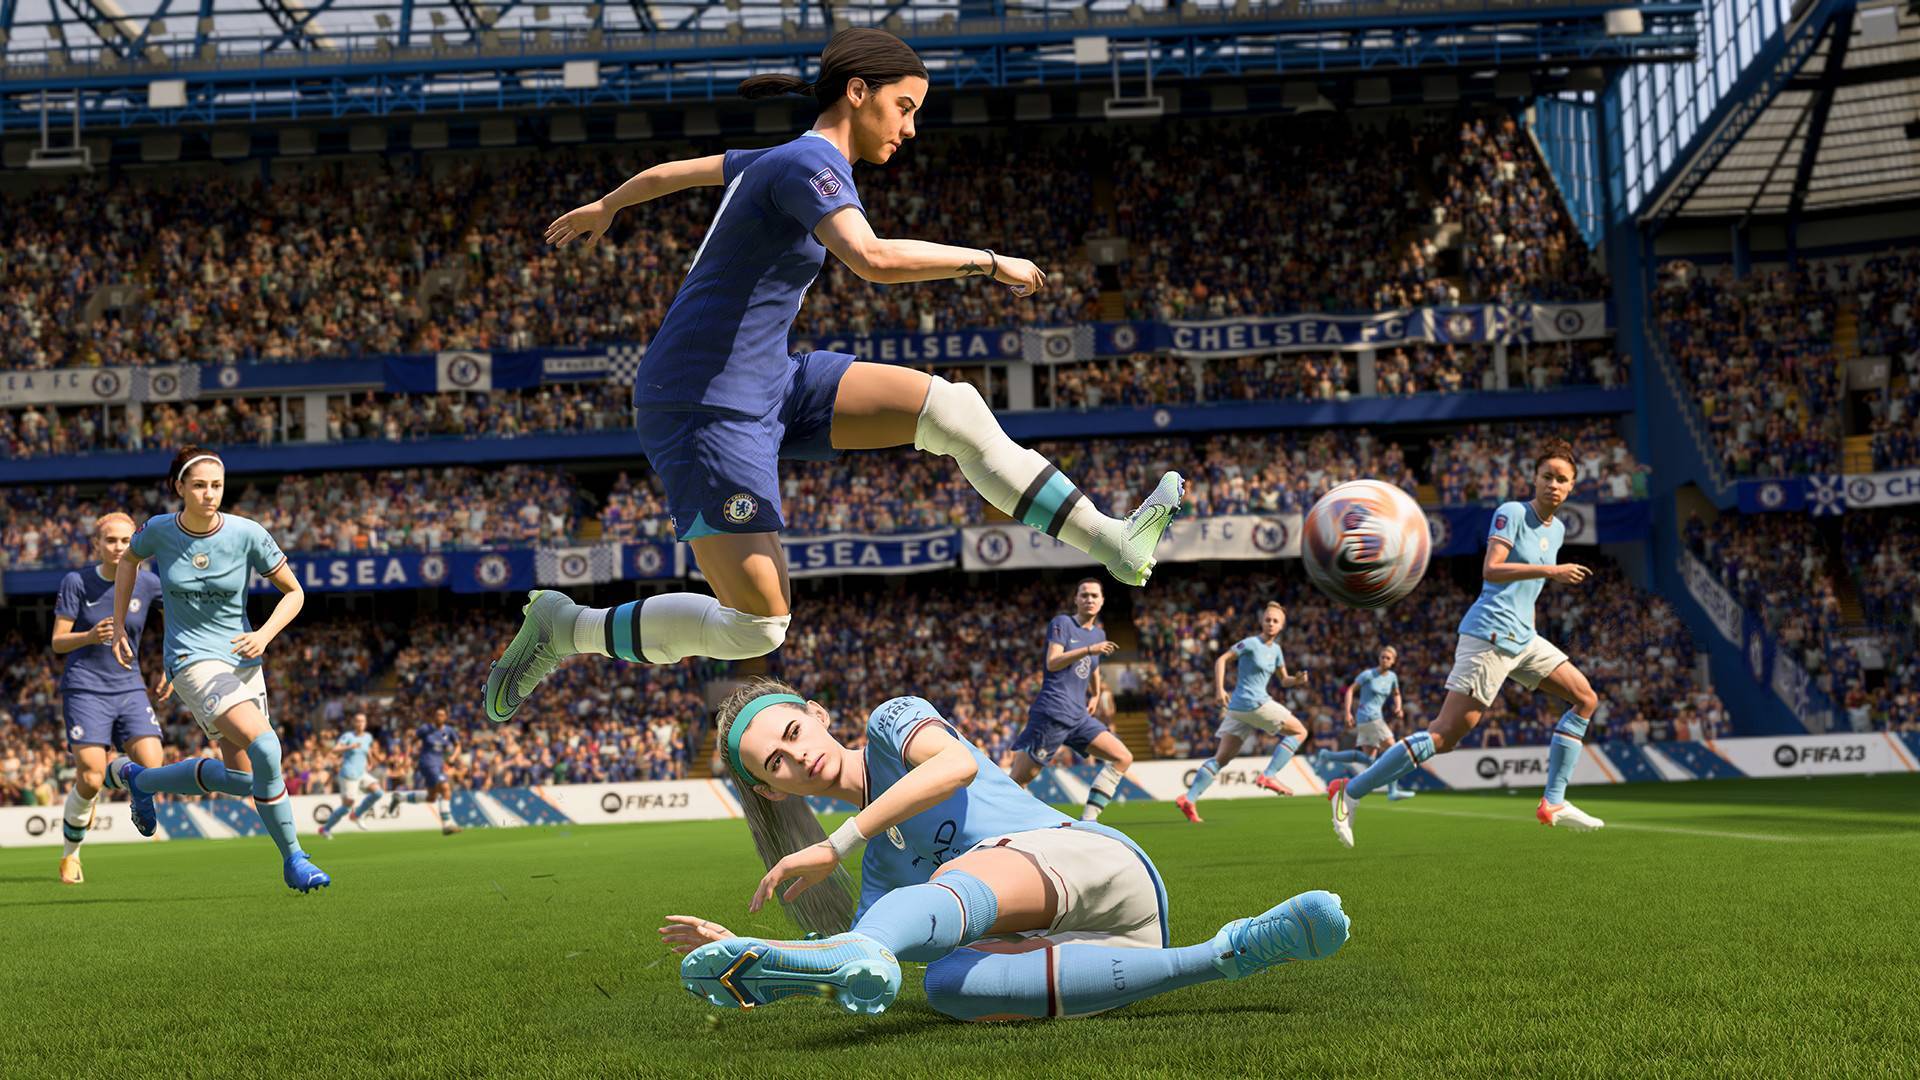 FIFA 23 (PS5) cheap - Price of $13.92